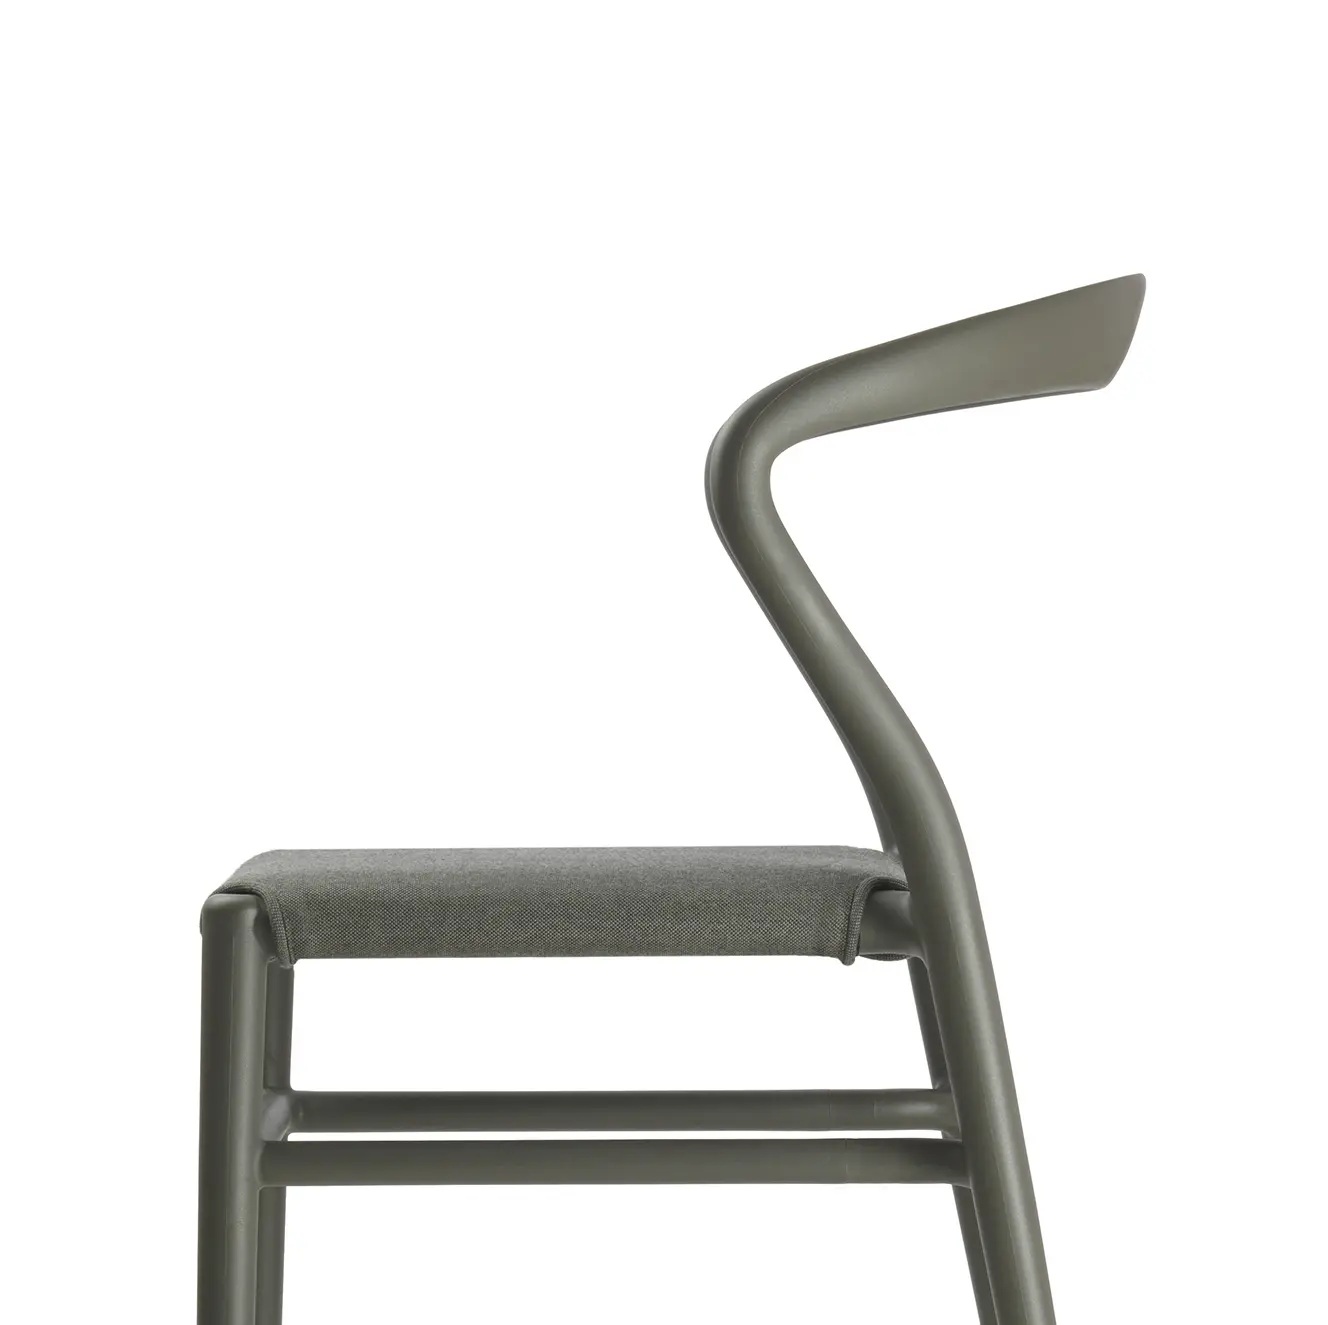 Joi chair by TOOU